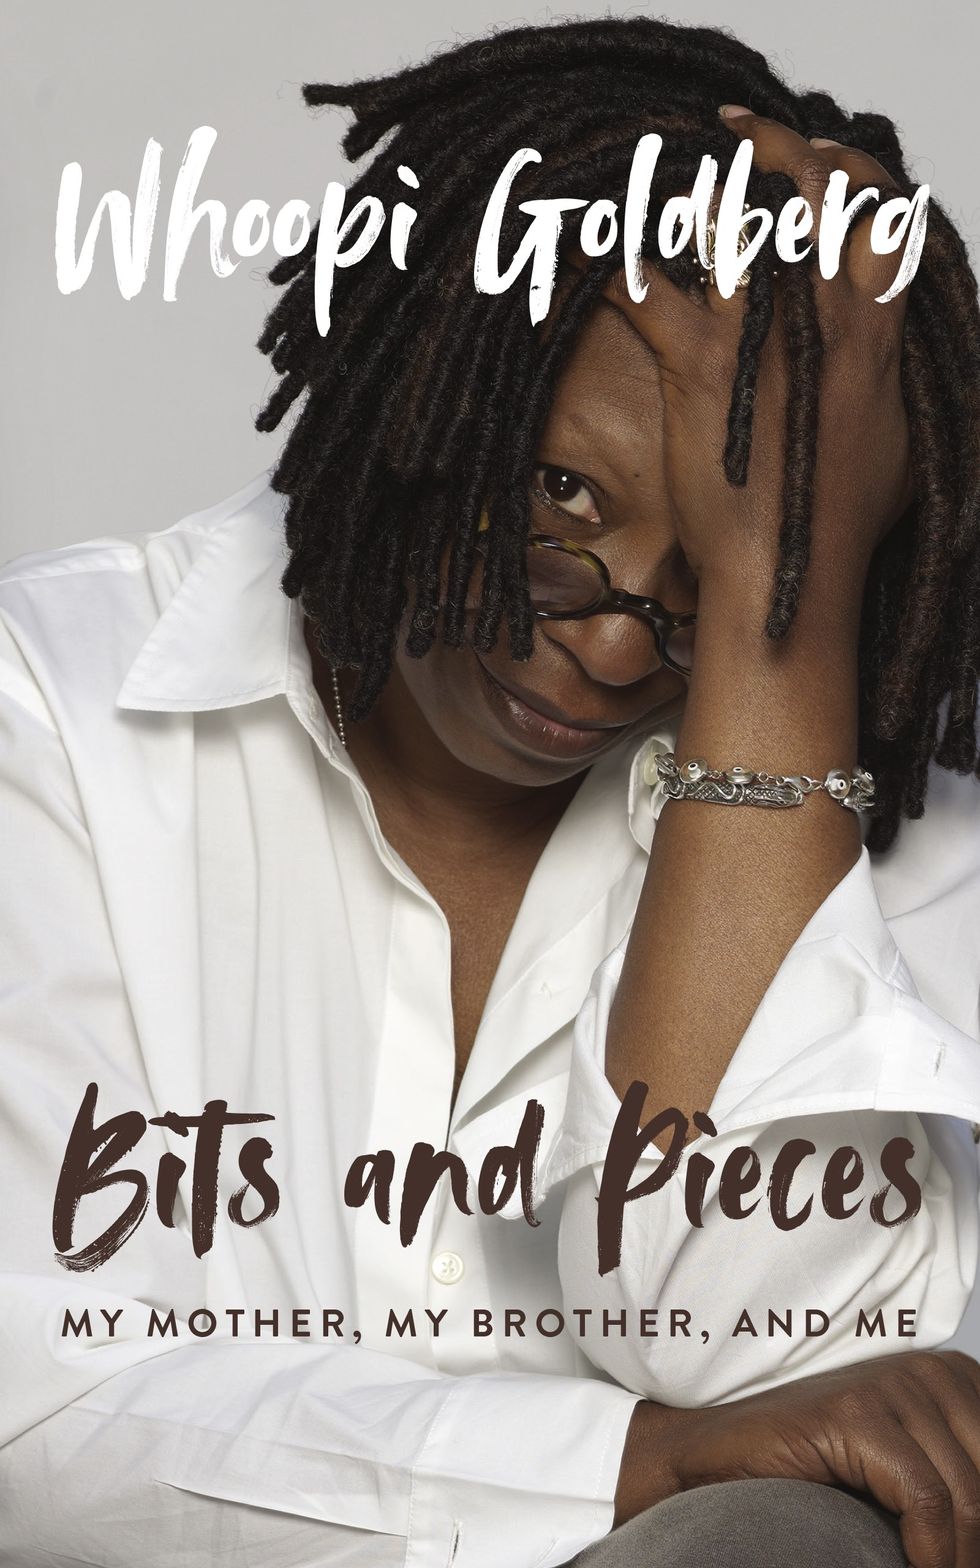 "Bits and Pieces" by Whoopi Goldberg